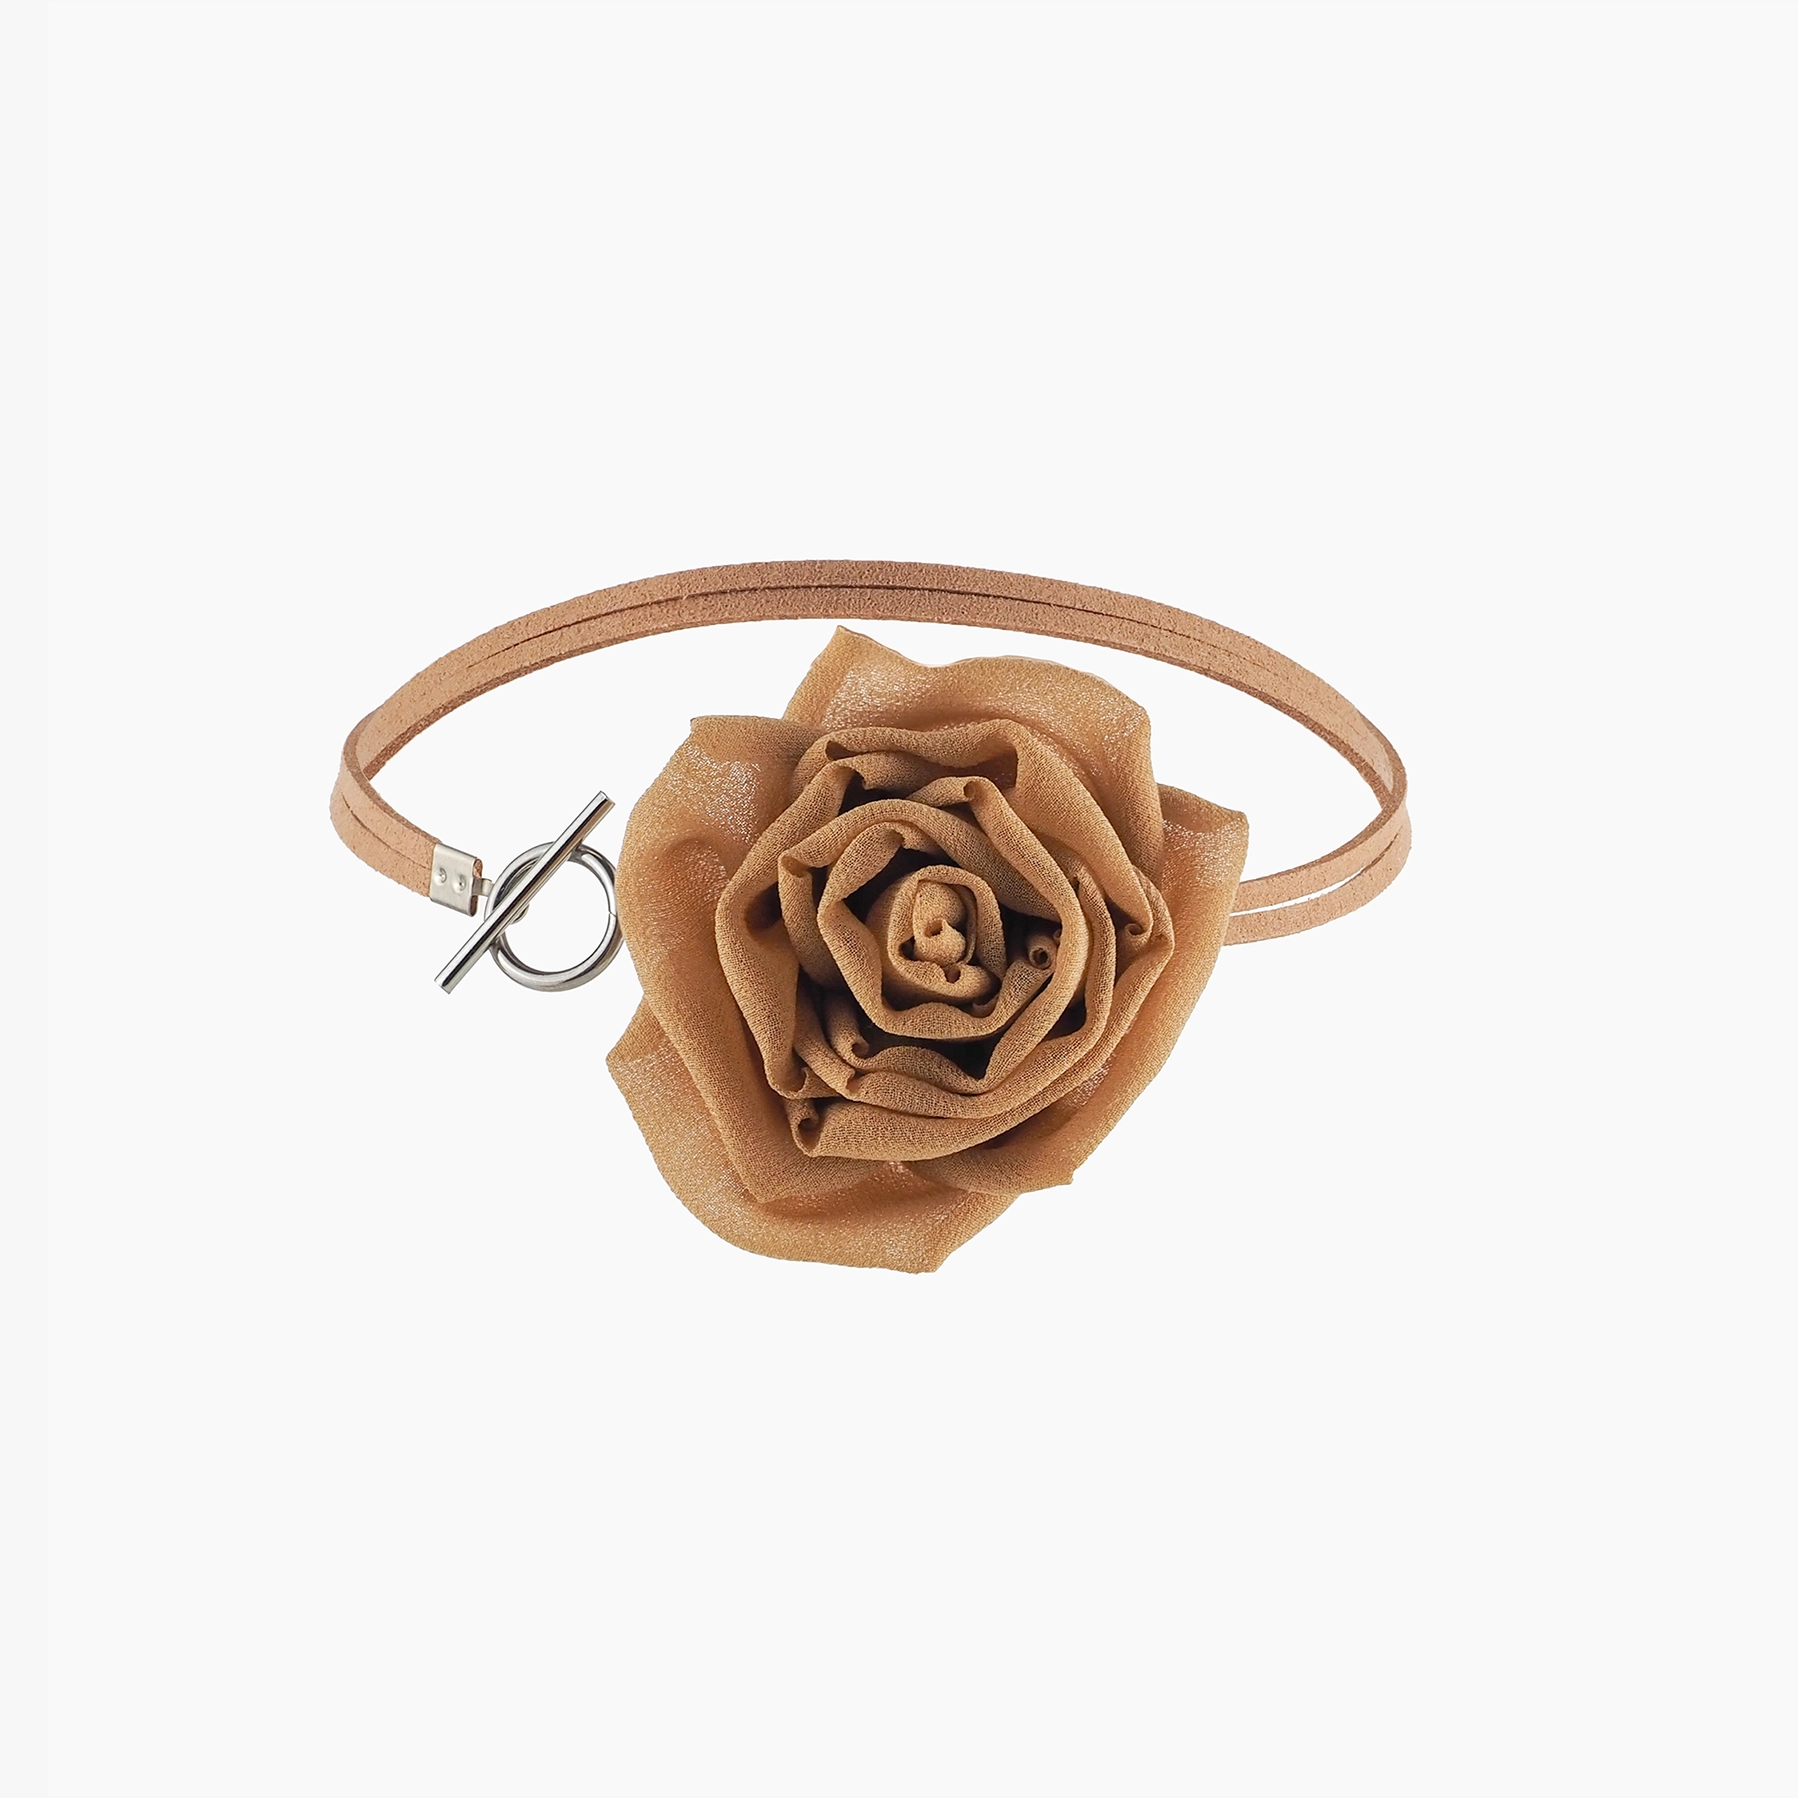 Gold Silk Rose Choker Necklace with Toggle Clasp